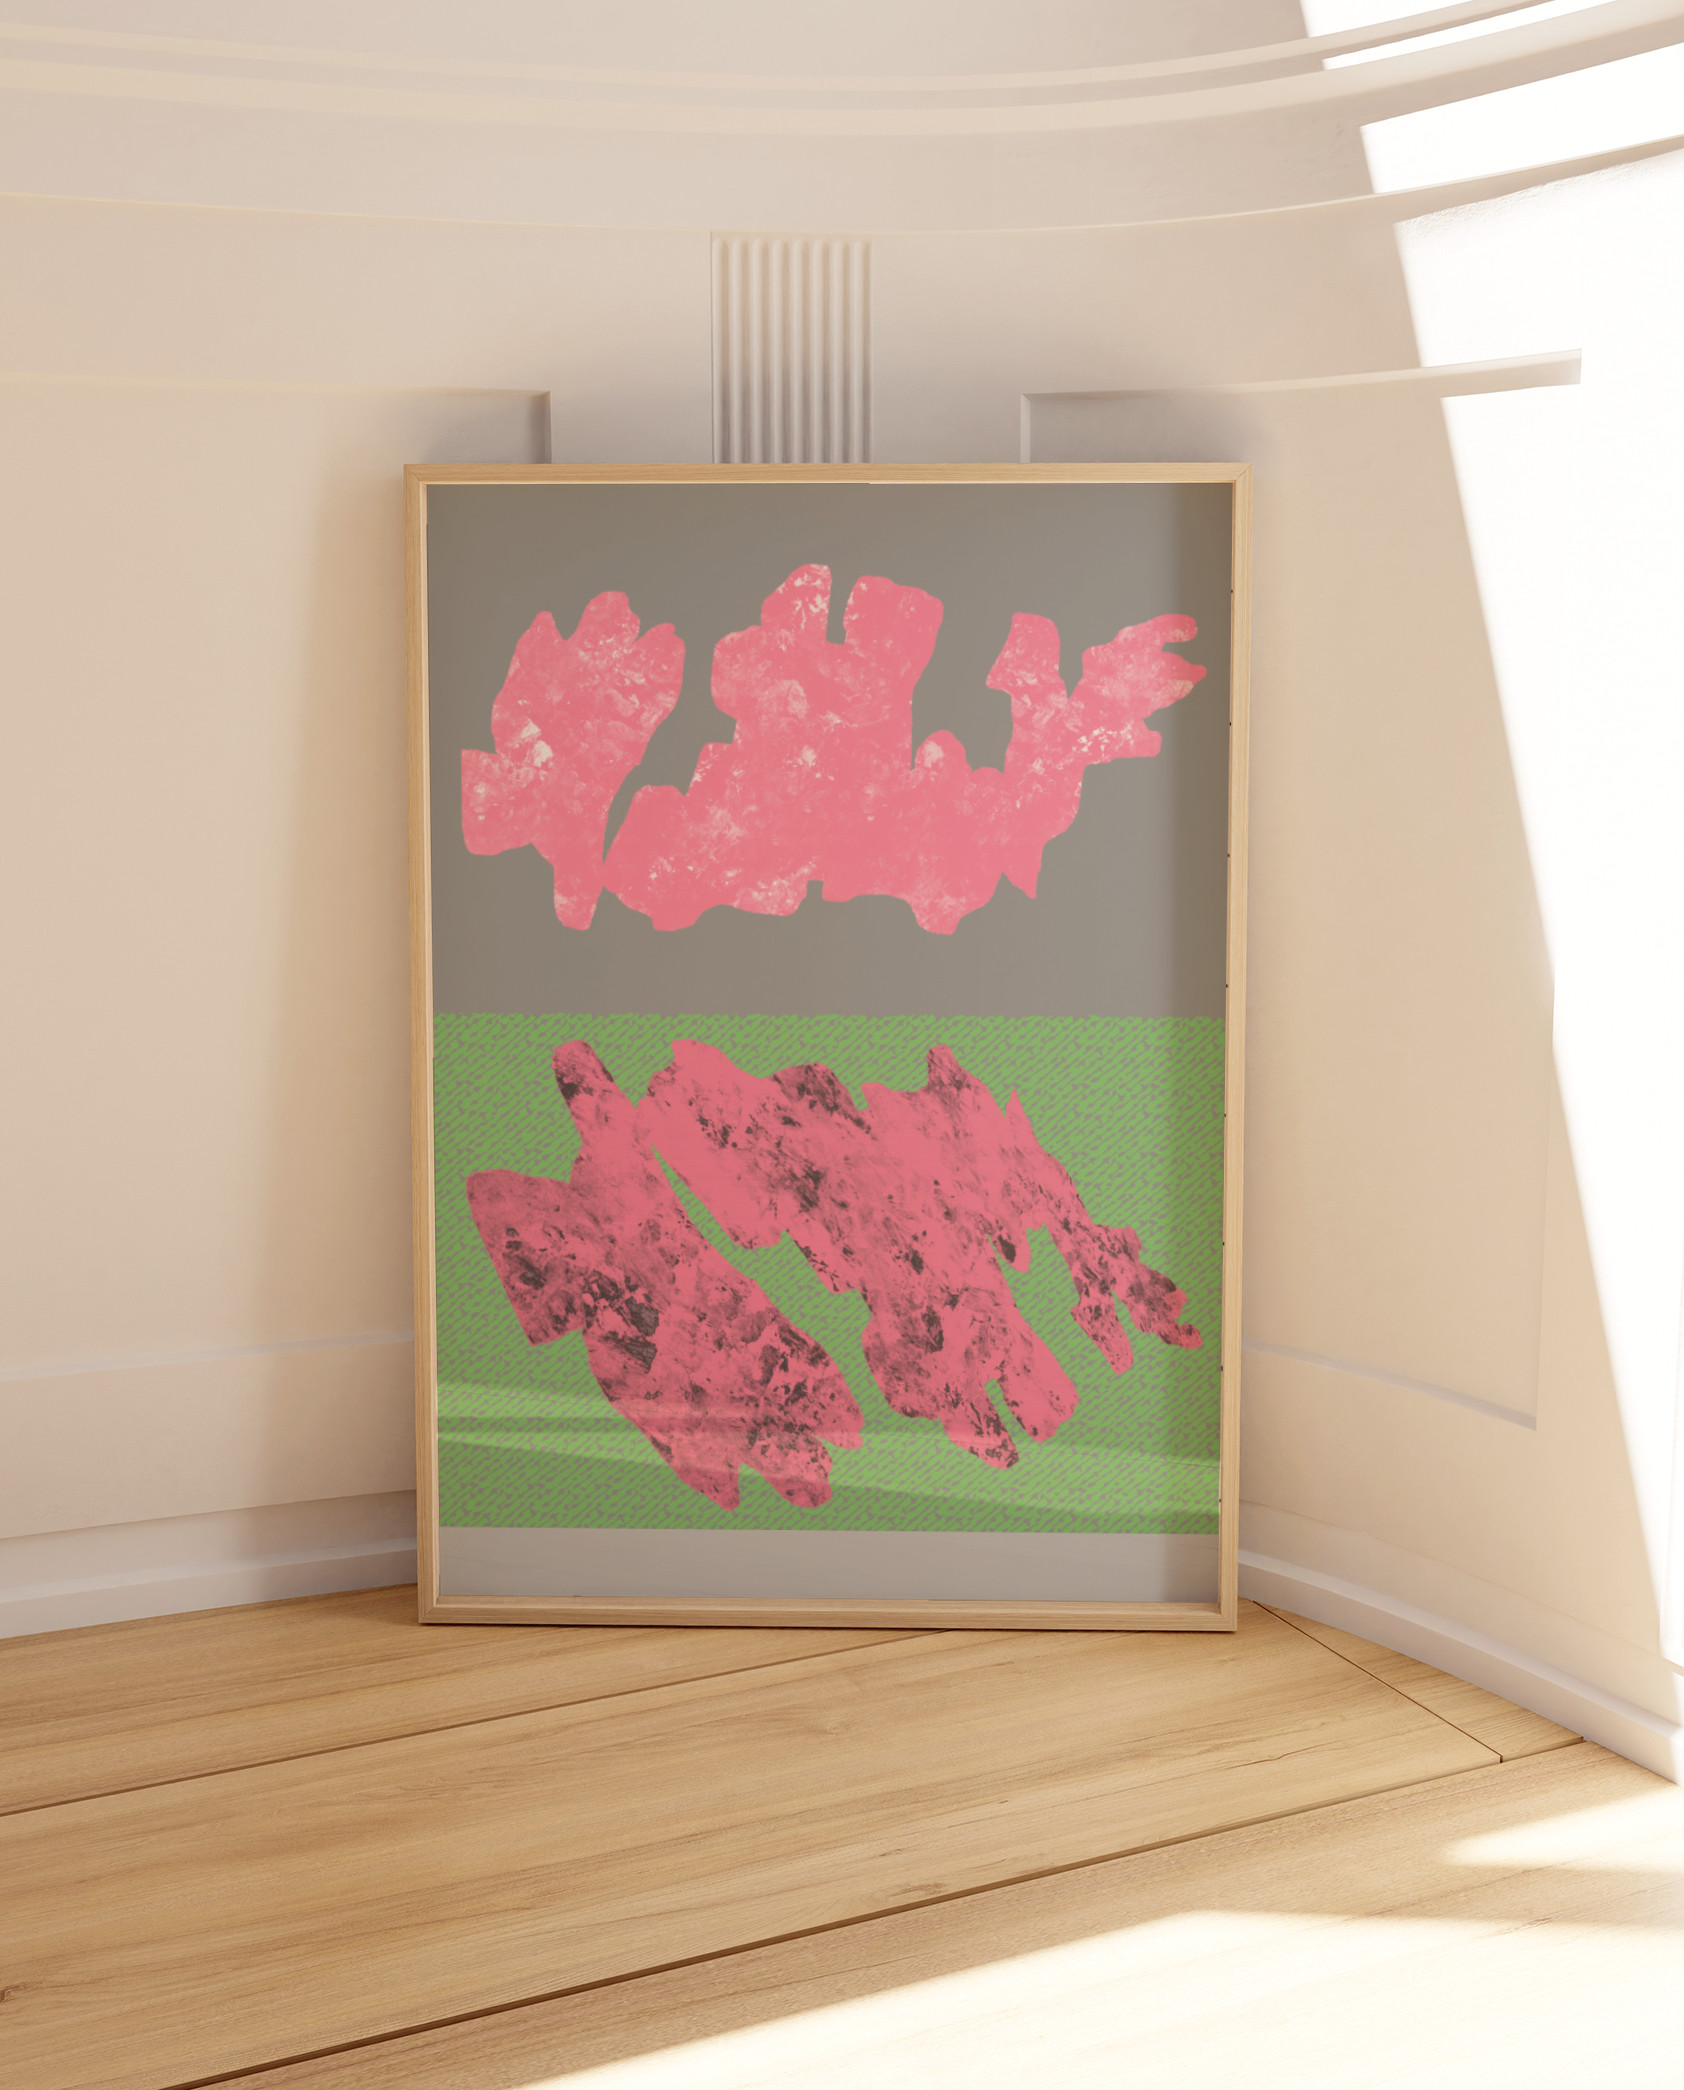 Photograph of Cherry Tree, graphic poster designed by Lena Robin with bright pink colors